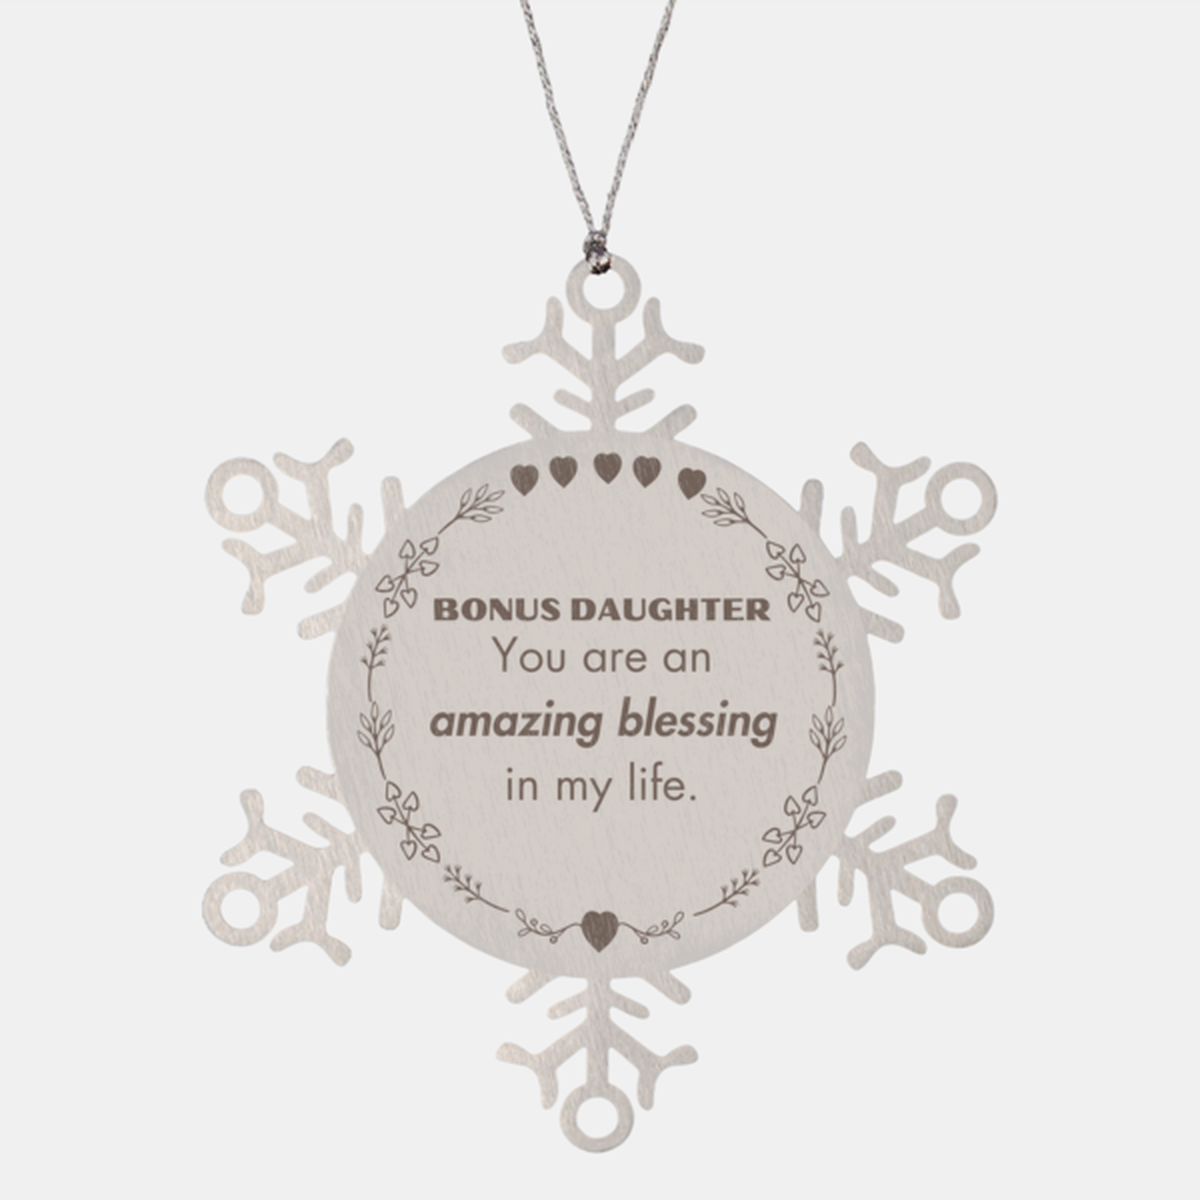 Bonus Daughter Snowflake Ornament, You are an amazing blessing in my life, Thank You Gifts For Bonus Daughter, Inspirational Birthday Christmas Unique Gifts For Bonus Daughter